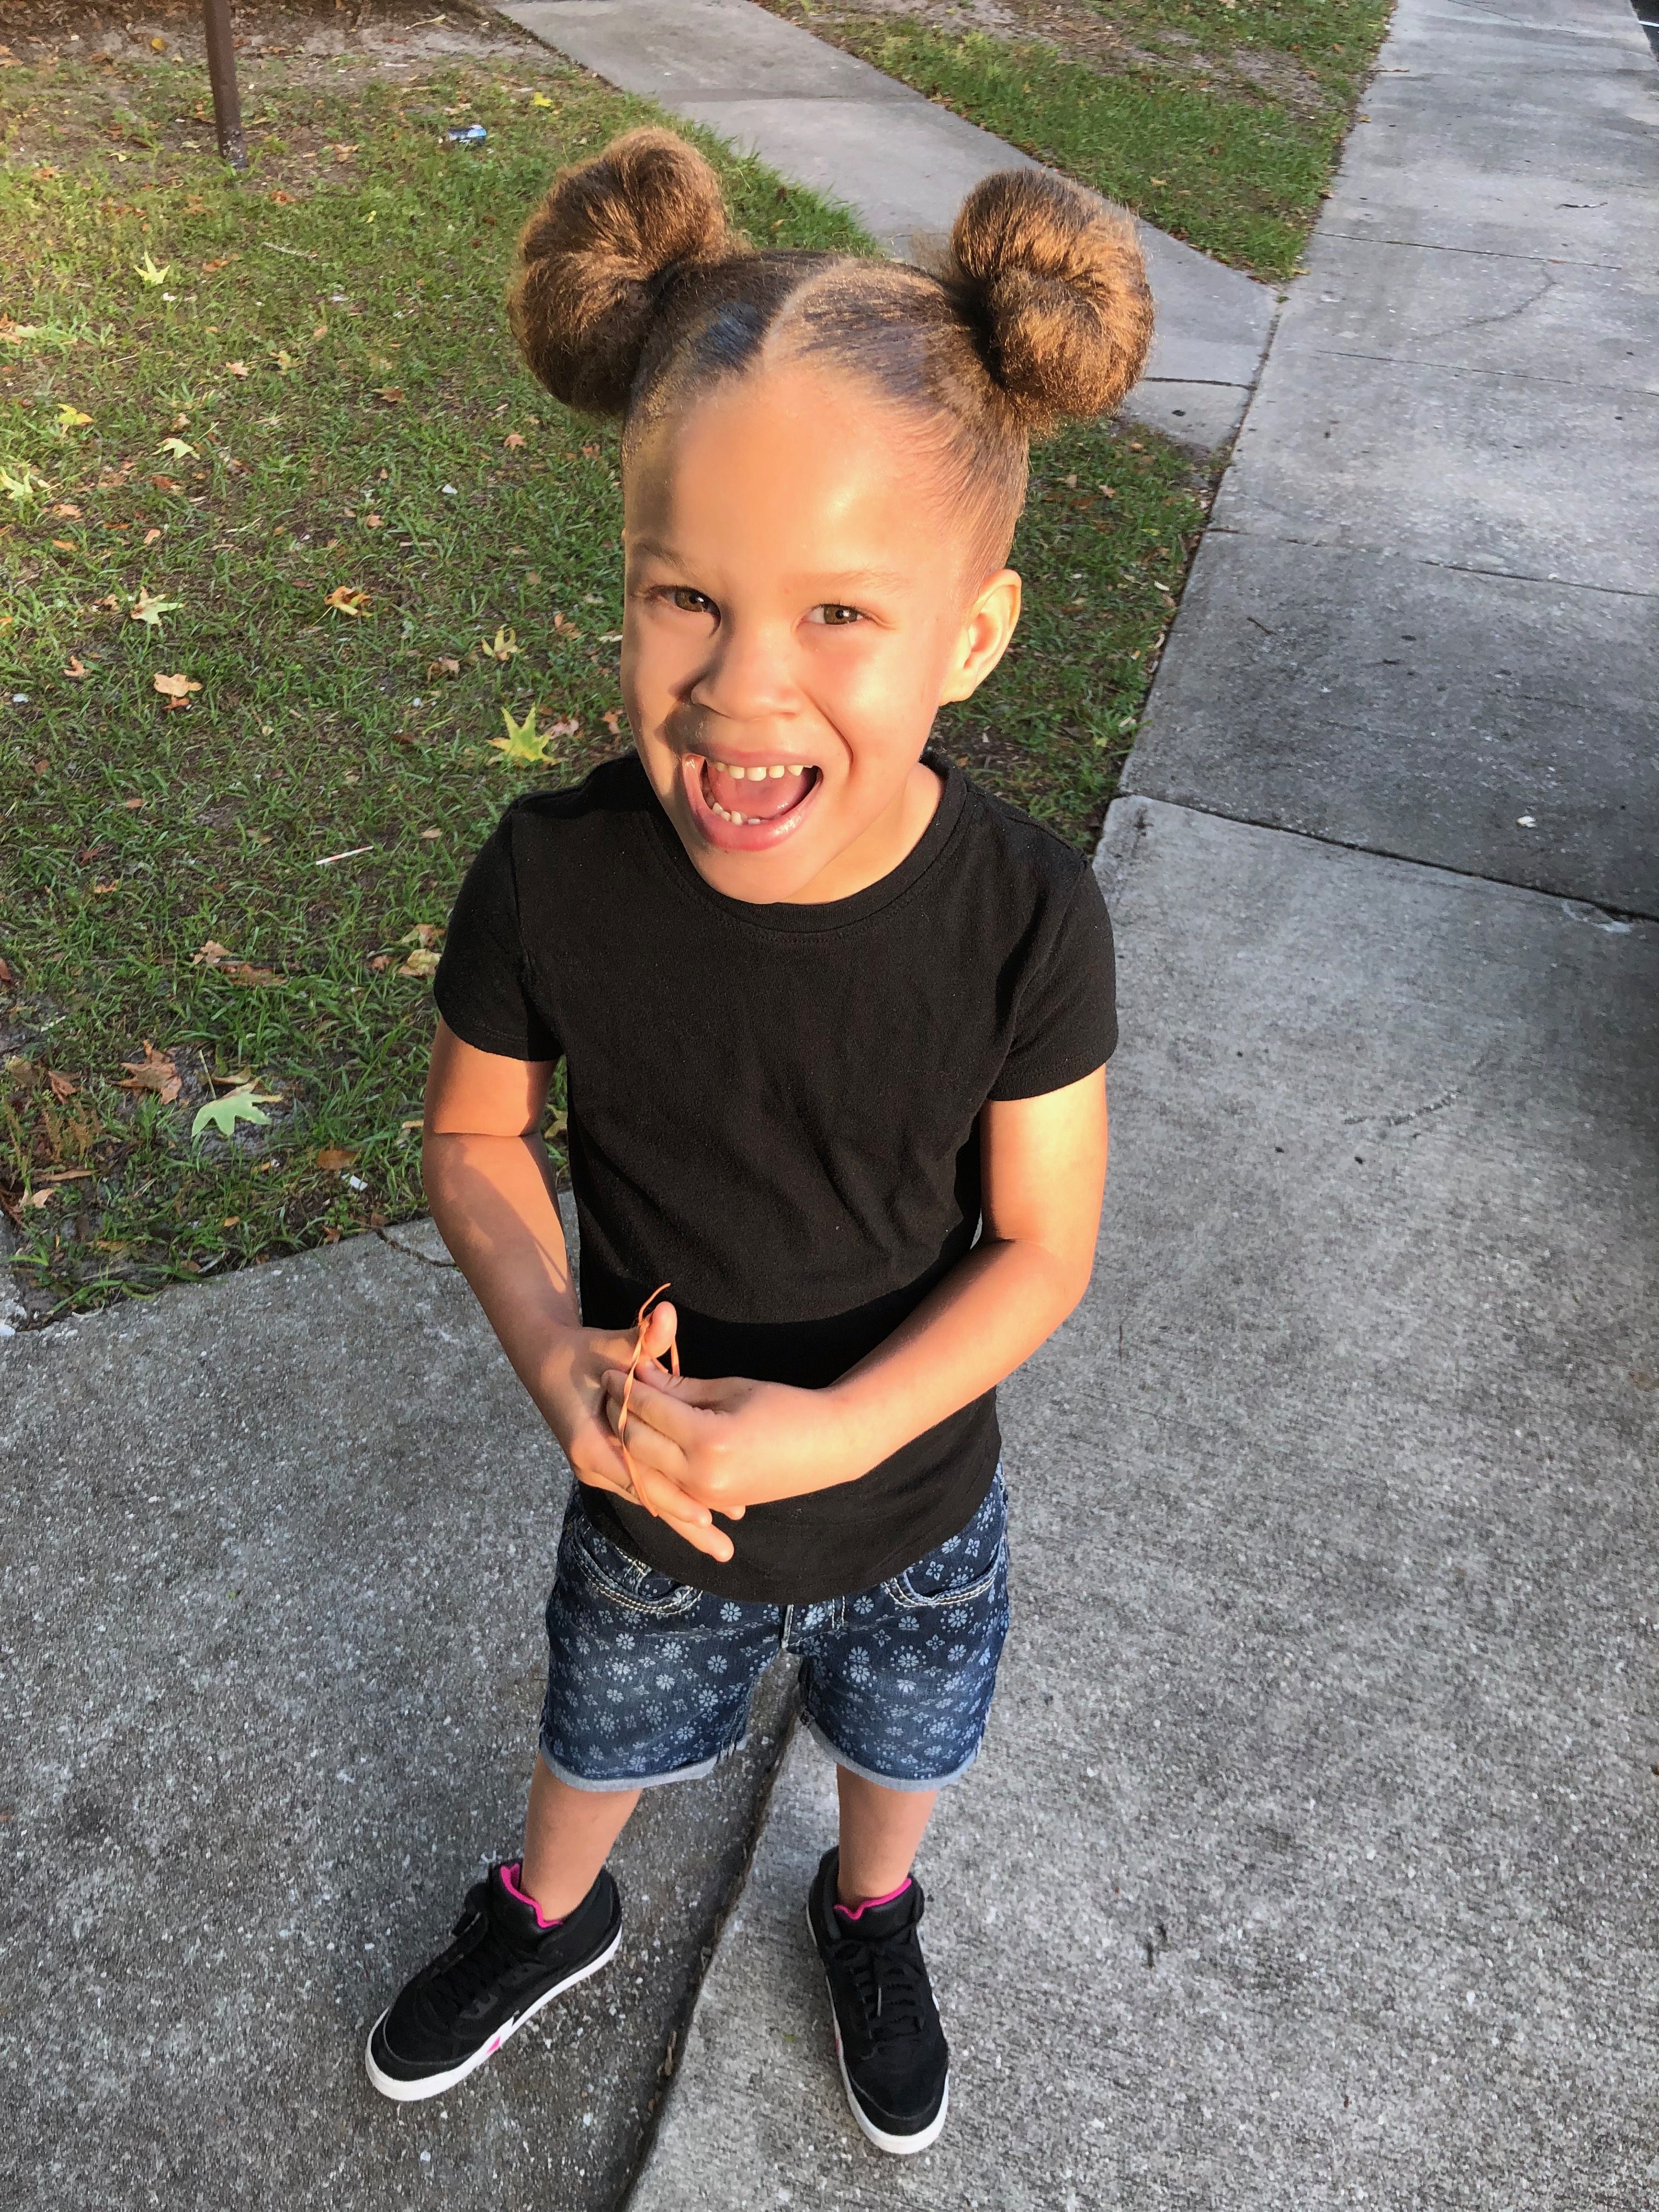 The mother of 6-year-old Nadia King plans to sue the Florida school district where a social worker invoked the state's Baker Act, placing the girl at a behavioral health center for 48 hours. (The Cochran Firm)